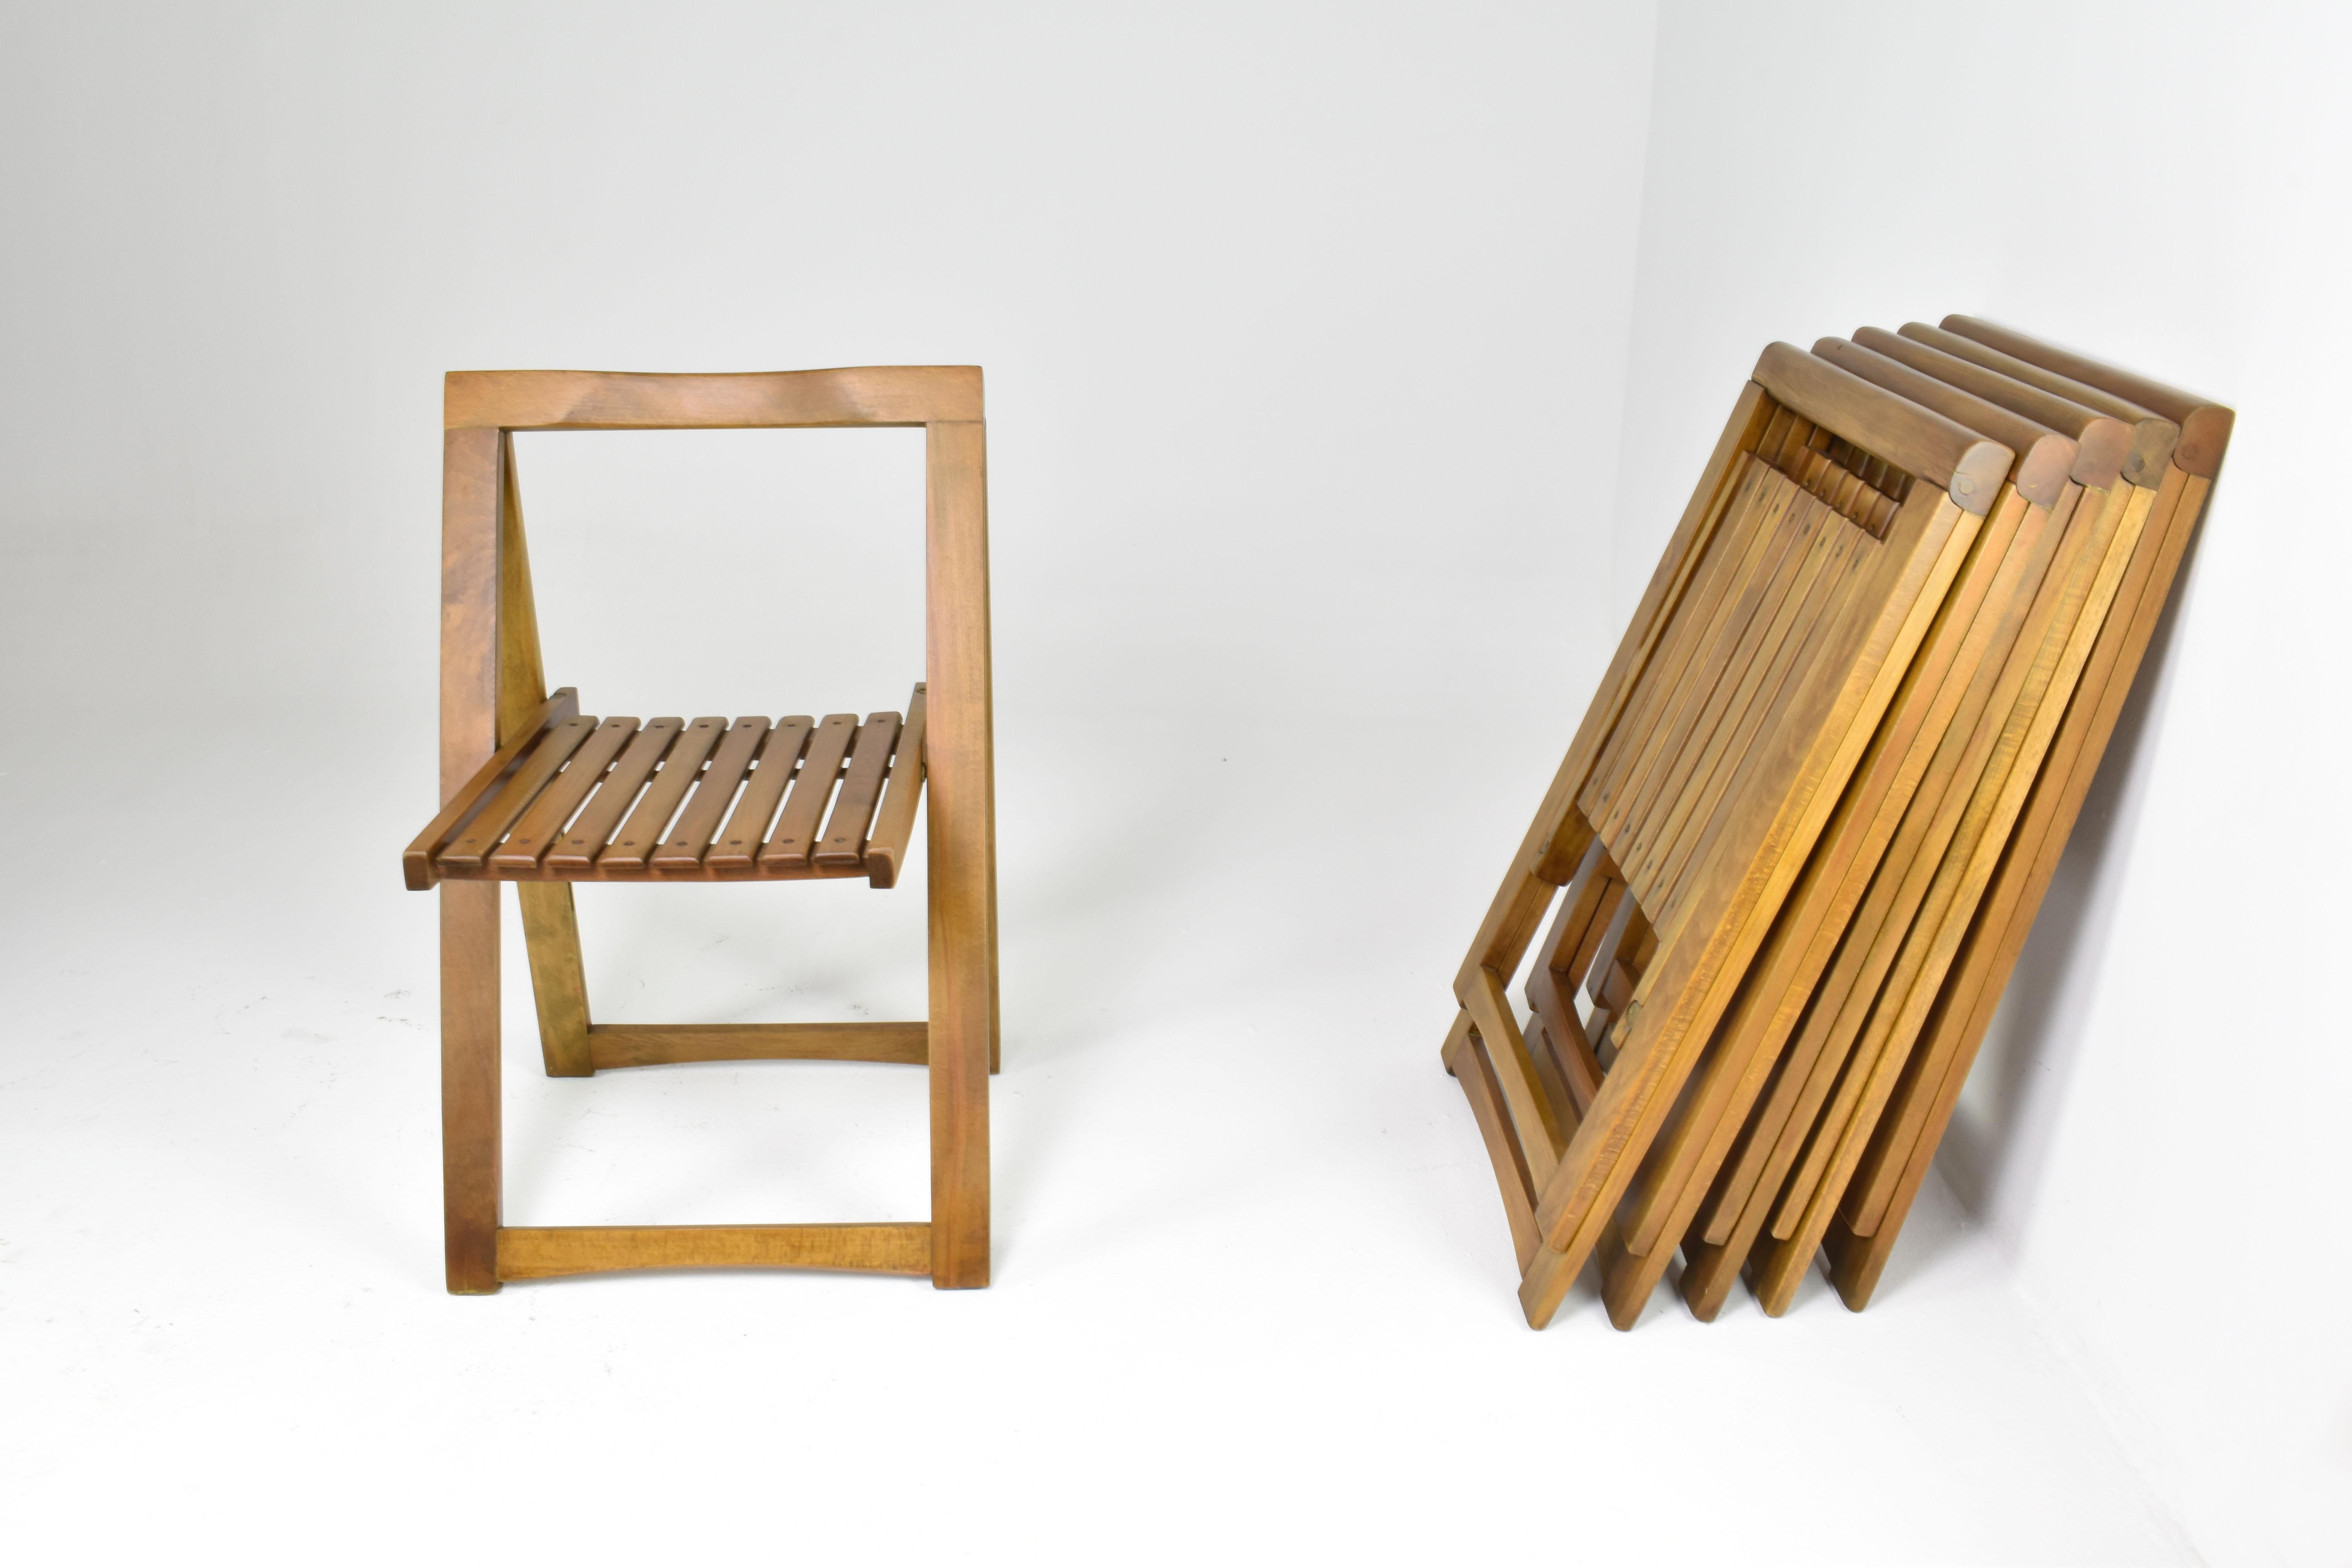 Wood Set of 6 Folding Italian chairs by Aldo Jacober for Alberto Bazzani, 1960s For Sale